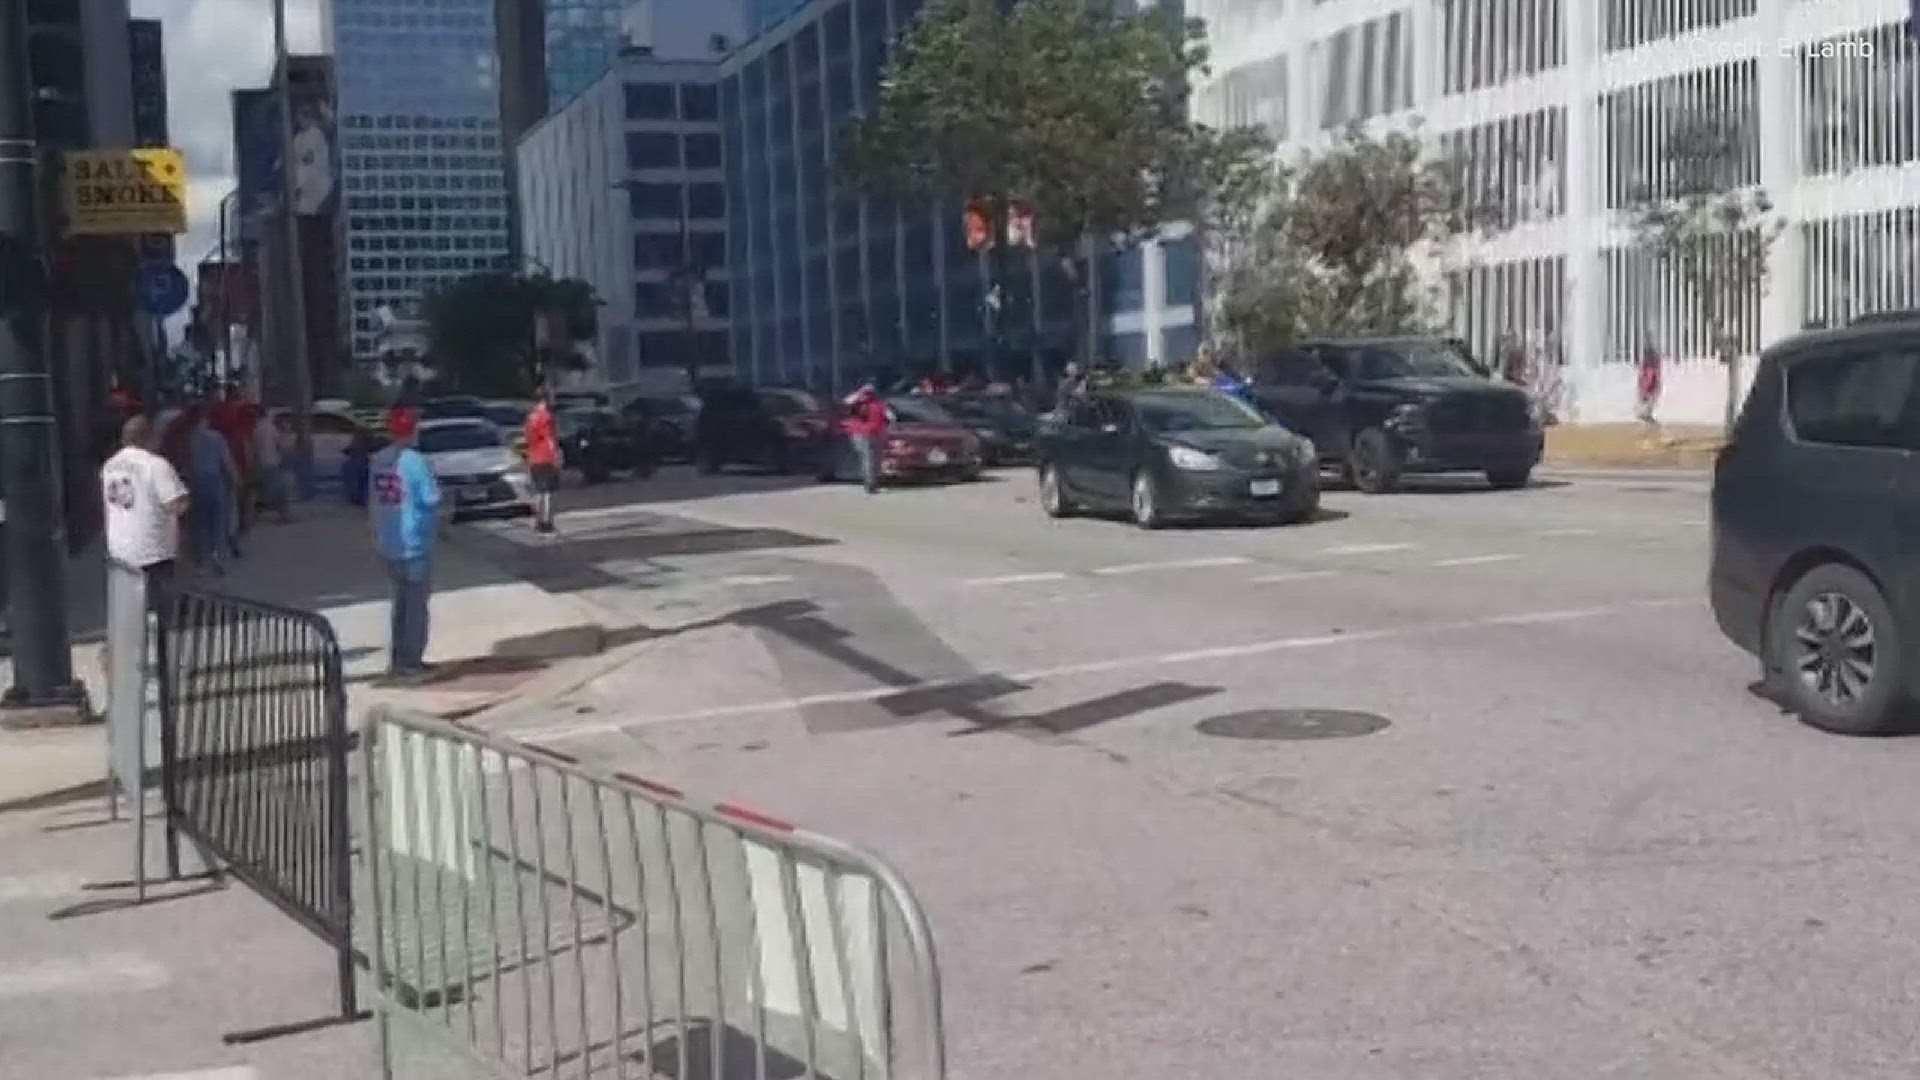 A viewer captured the moments leading up to a driver hitting a person on Broadway near Clark Avenue in downtown St. Louis. The driver sped off after the incident.